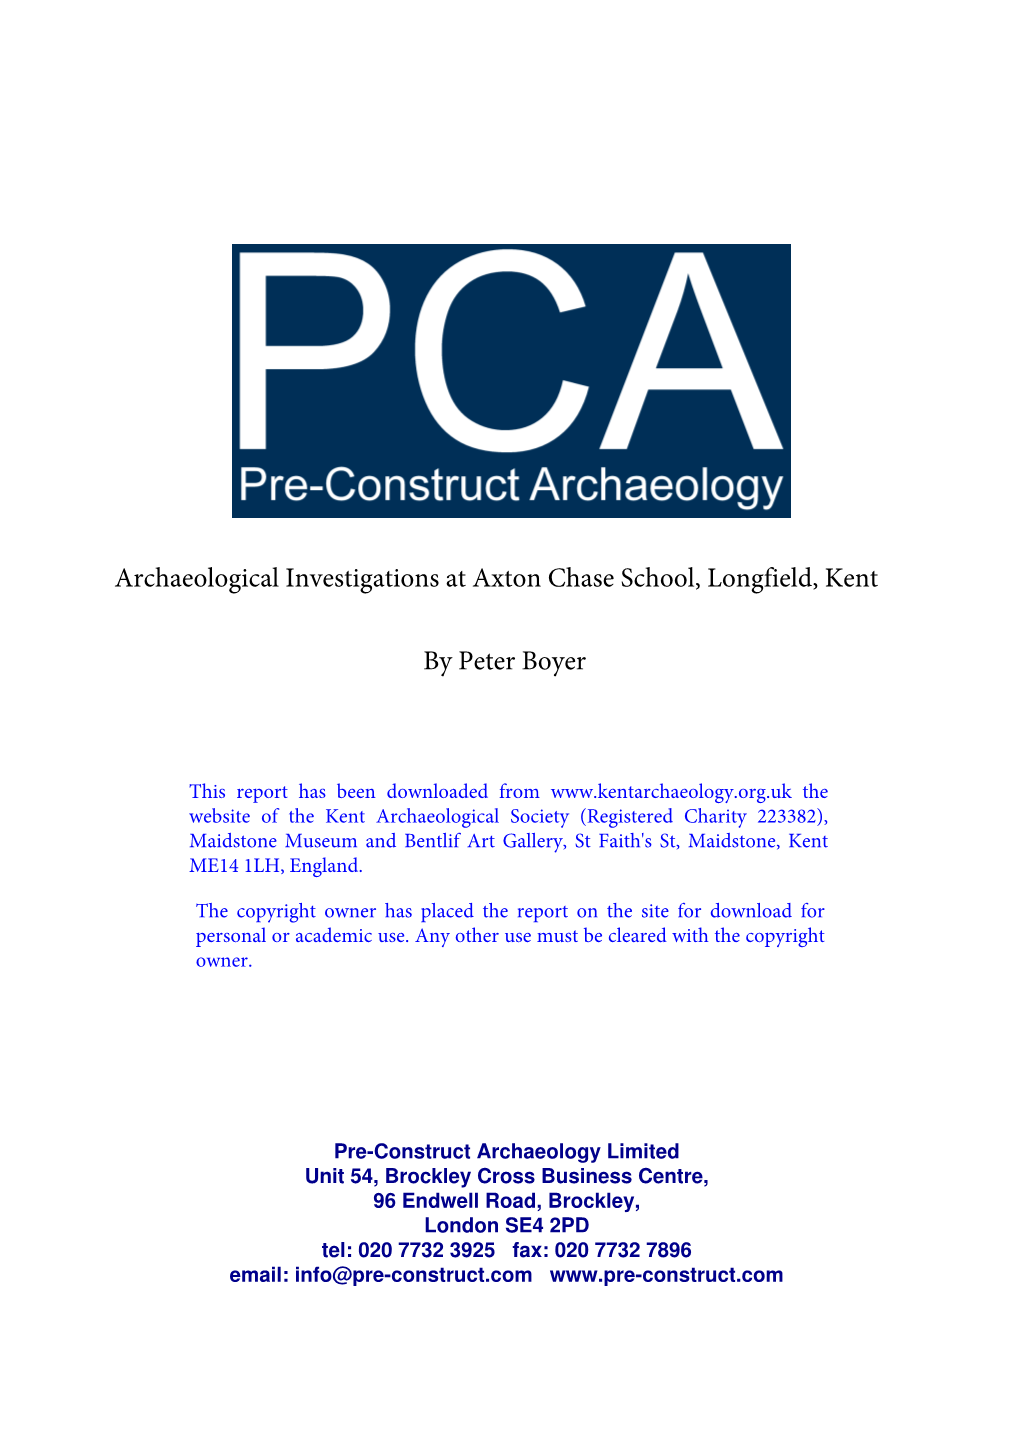 Archaeological Investigations at Axton Chase School, Longfield, Kent